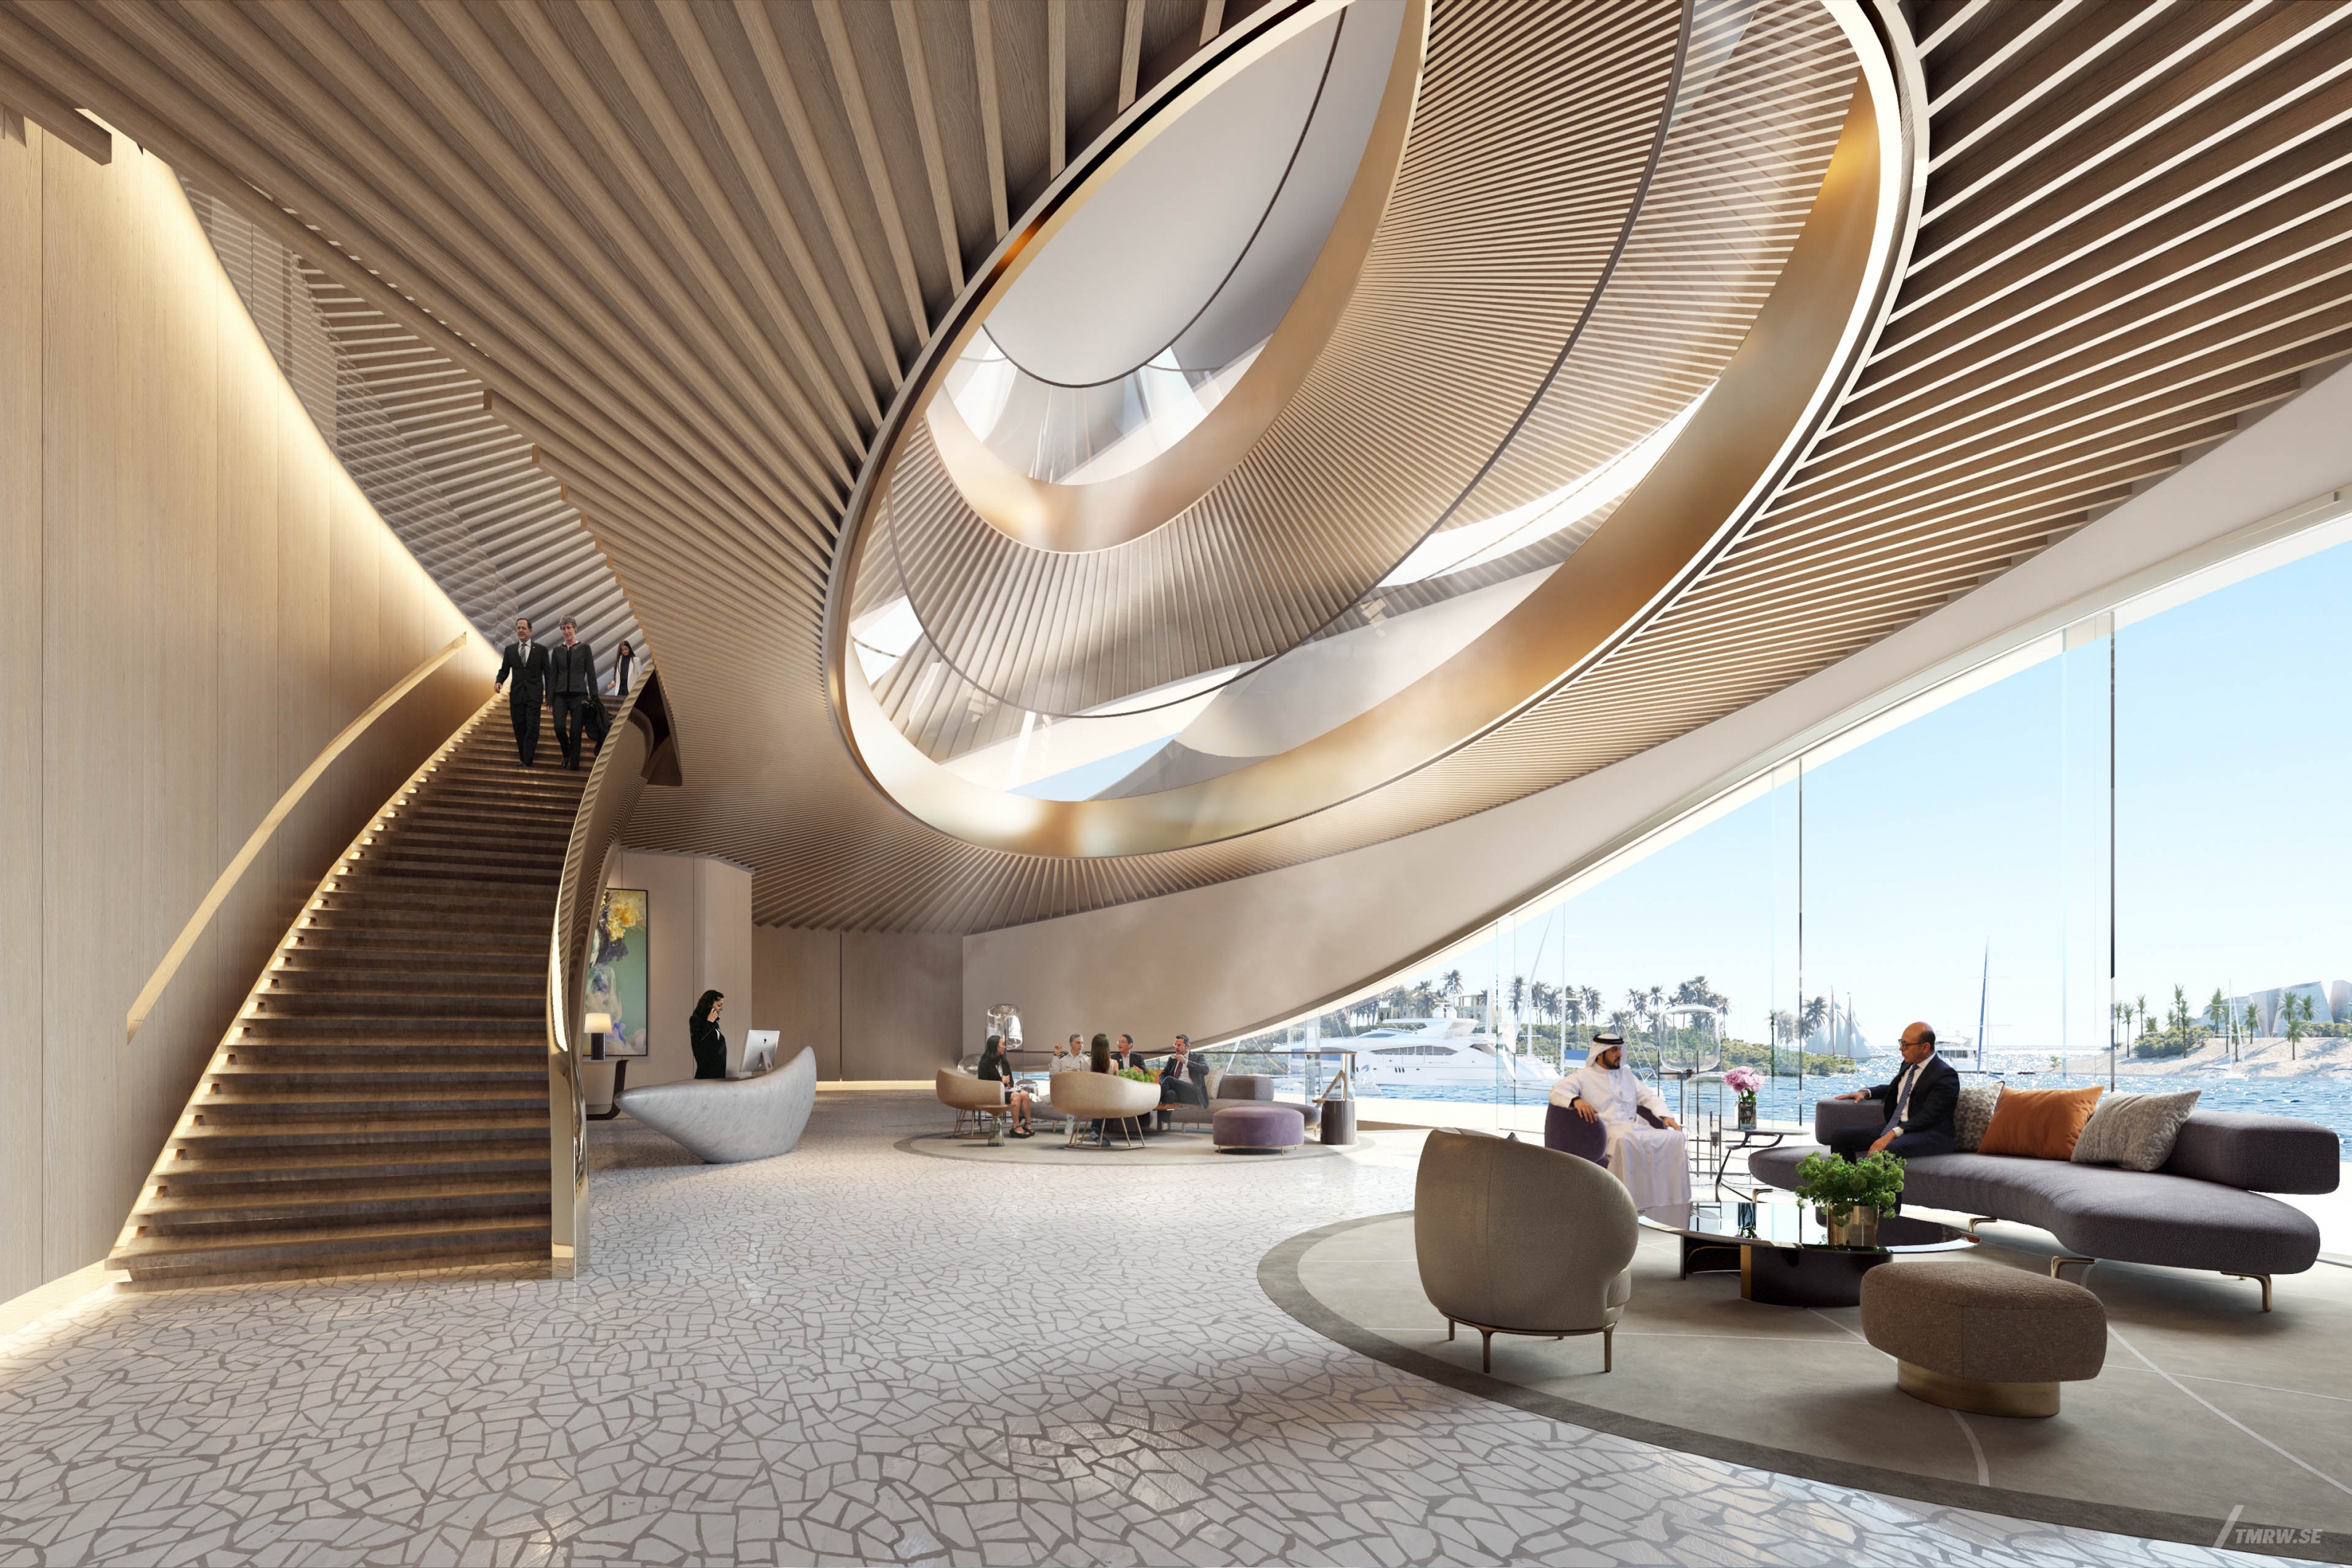 Architectural visualization of Red Sea Yacht Club for HKS/The Red Sea Developement Company. A image of the interoir of a lobby with people sitting in the area in daylight.